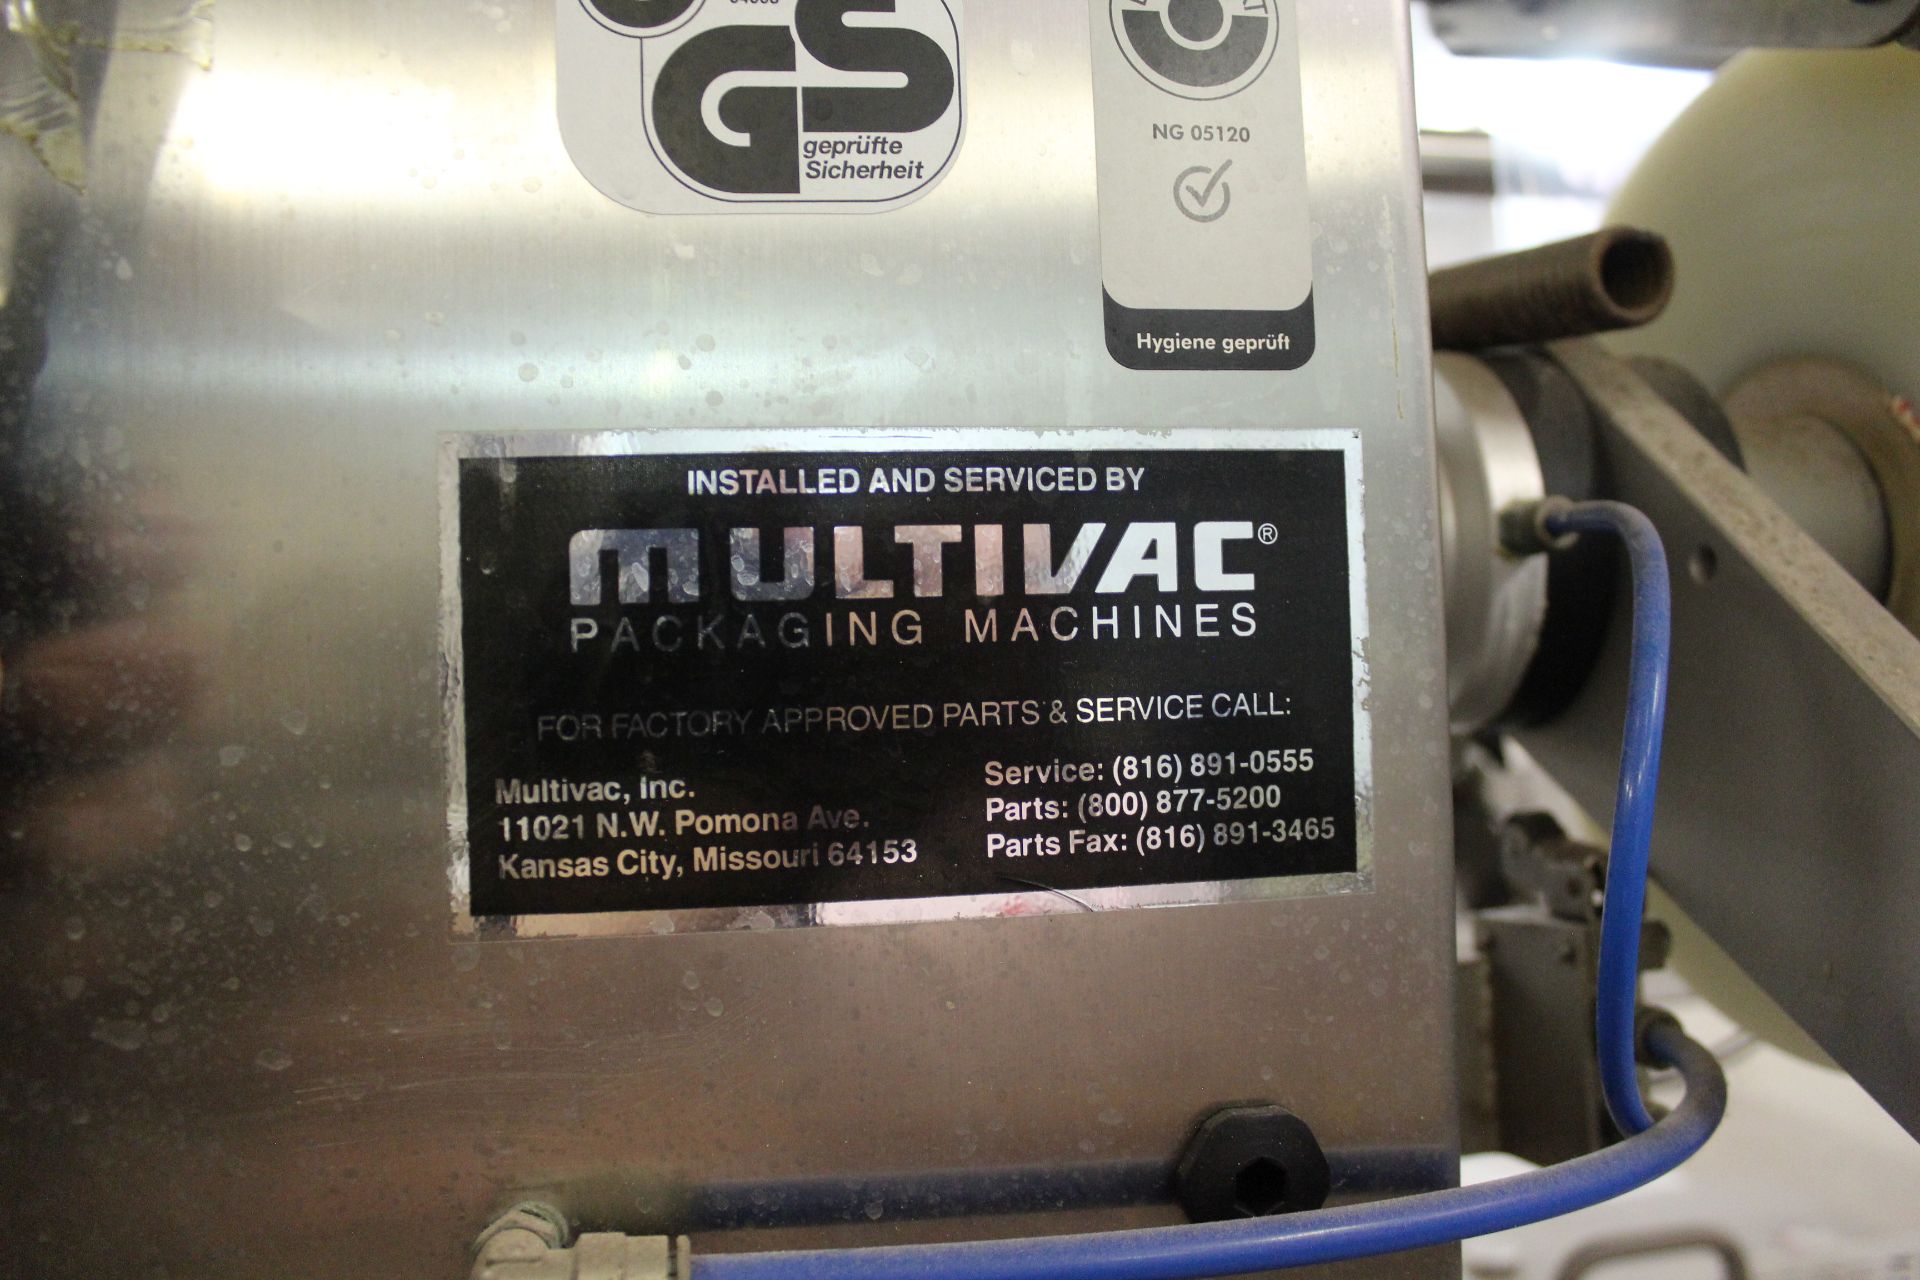 2005 Multivac R140 Rollstock Thermoformer Vacuum Packager, M# R140, S/N 103806 - Image 5 of 5